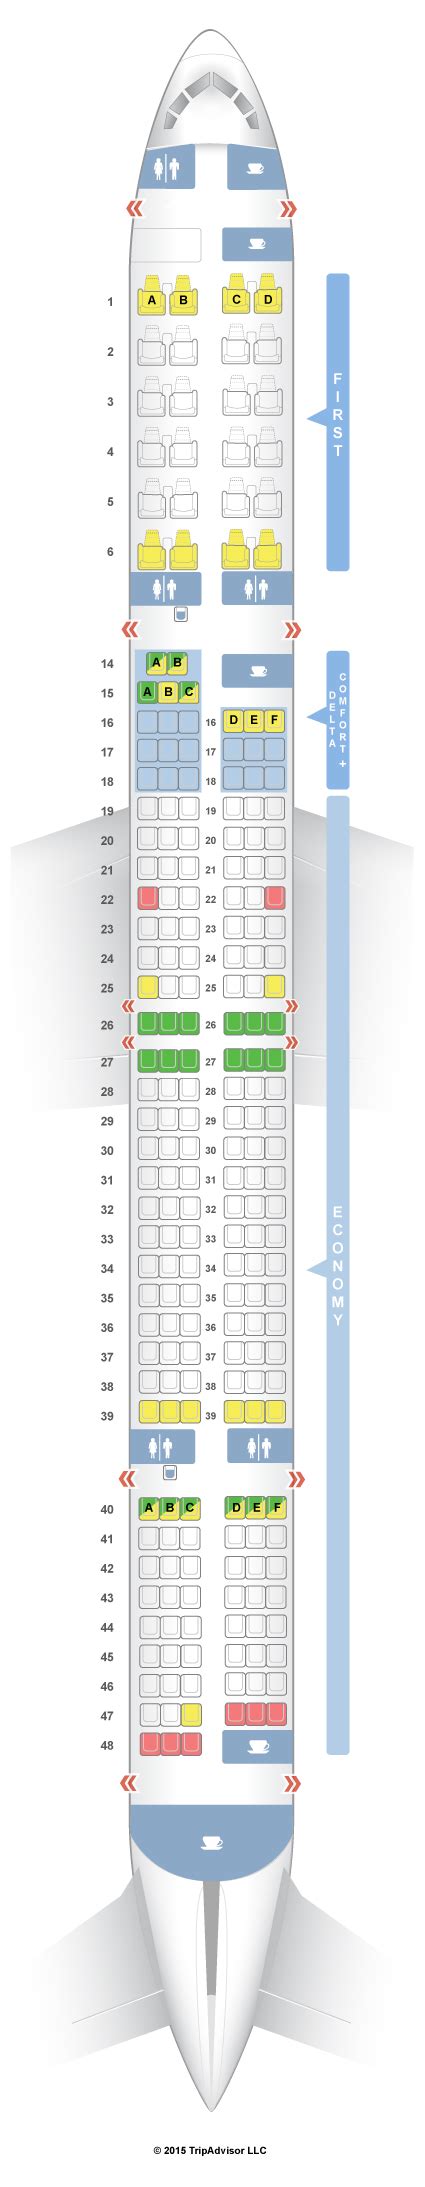 For your next Delta flight, use this seating chart to get the most comfortable seats, legroom, ... Boeing 757-300 (75Y) Boeing 767-300ER (76H/76Z) Layout 3; Boeing 767-300ER (76L) Layout 2; ... SeatGuru was created to help travelers choose the best seats and in-flight amenities. Forum; Mobile; FAQ; Contact Us;. 